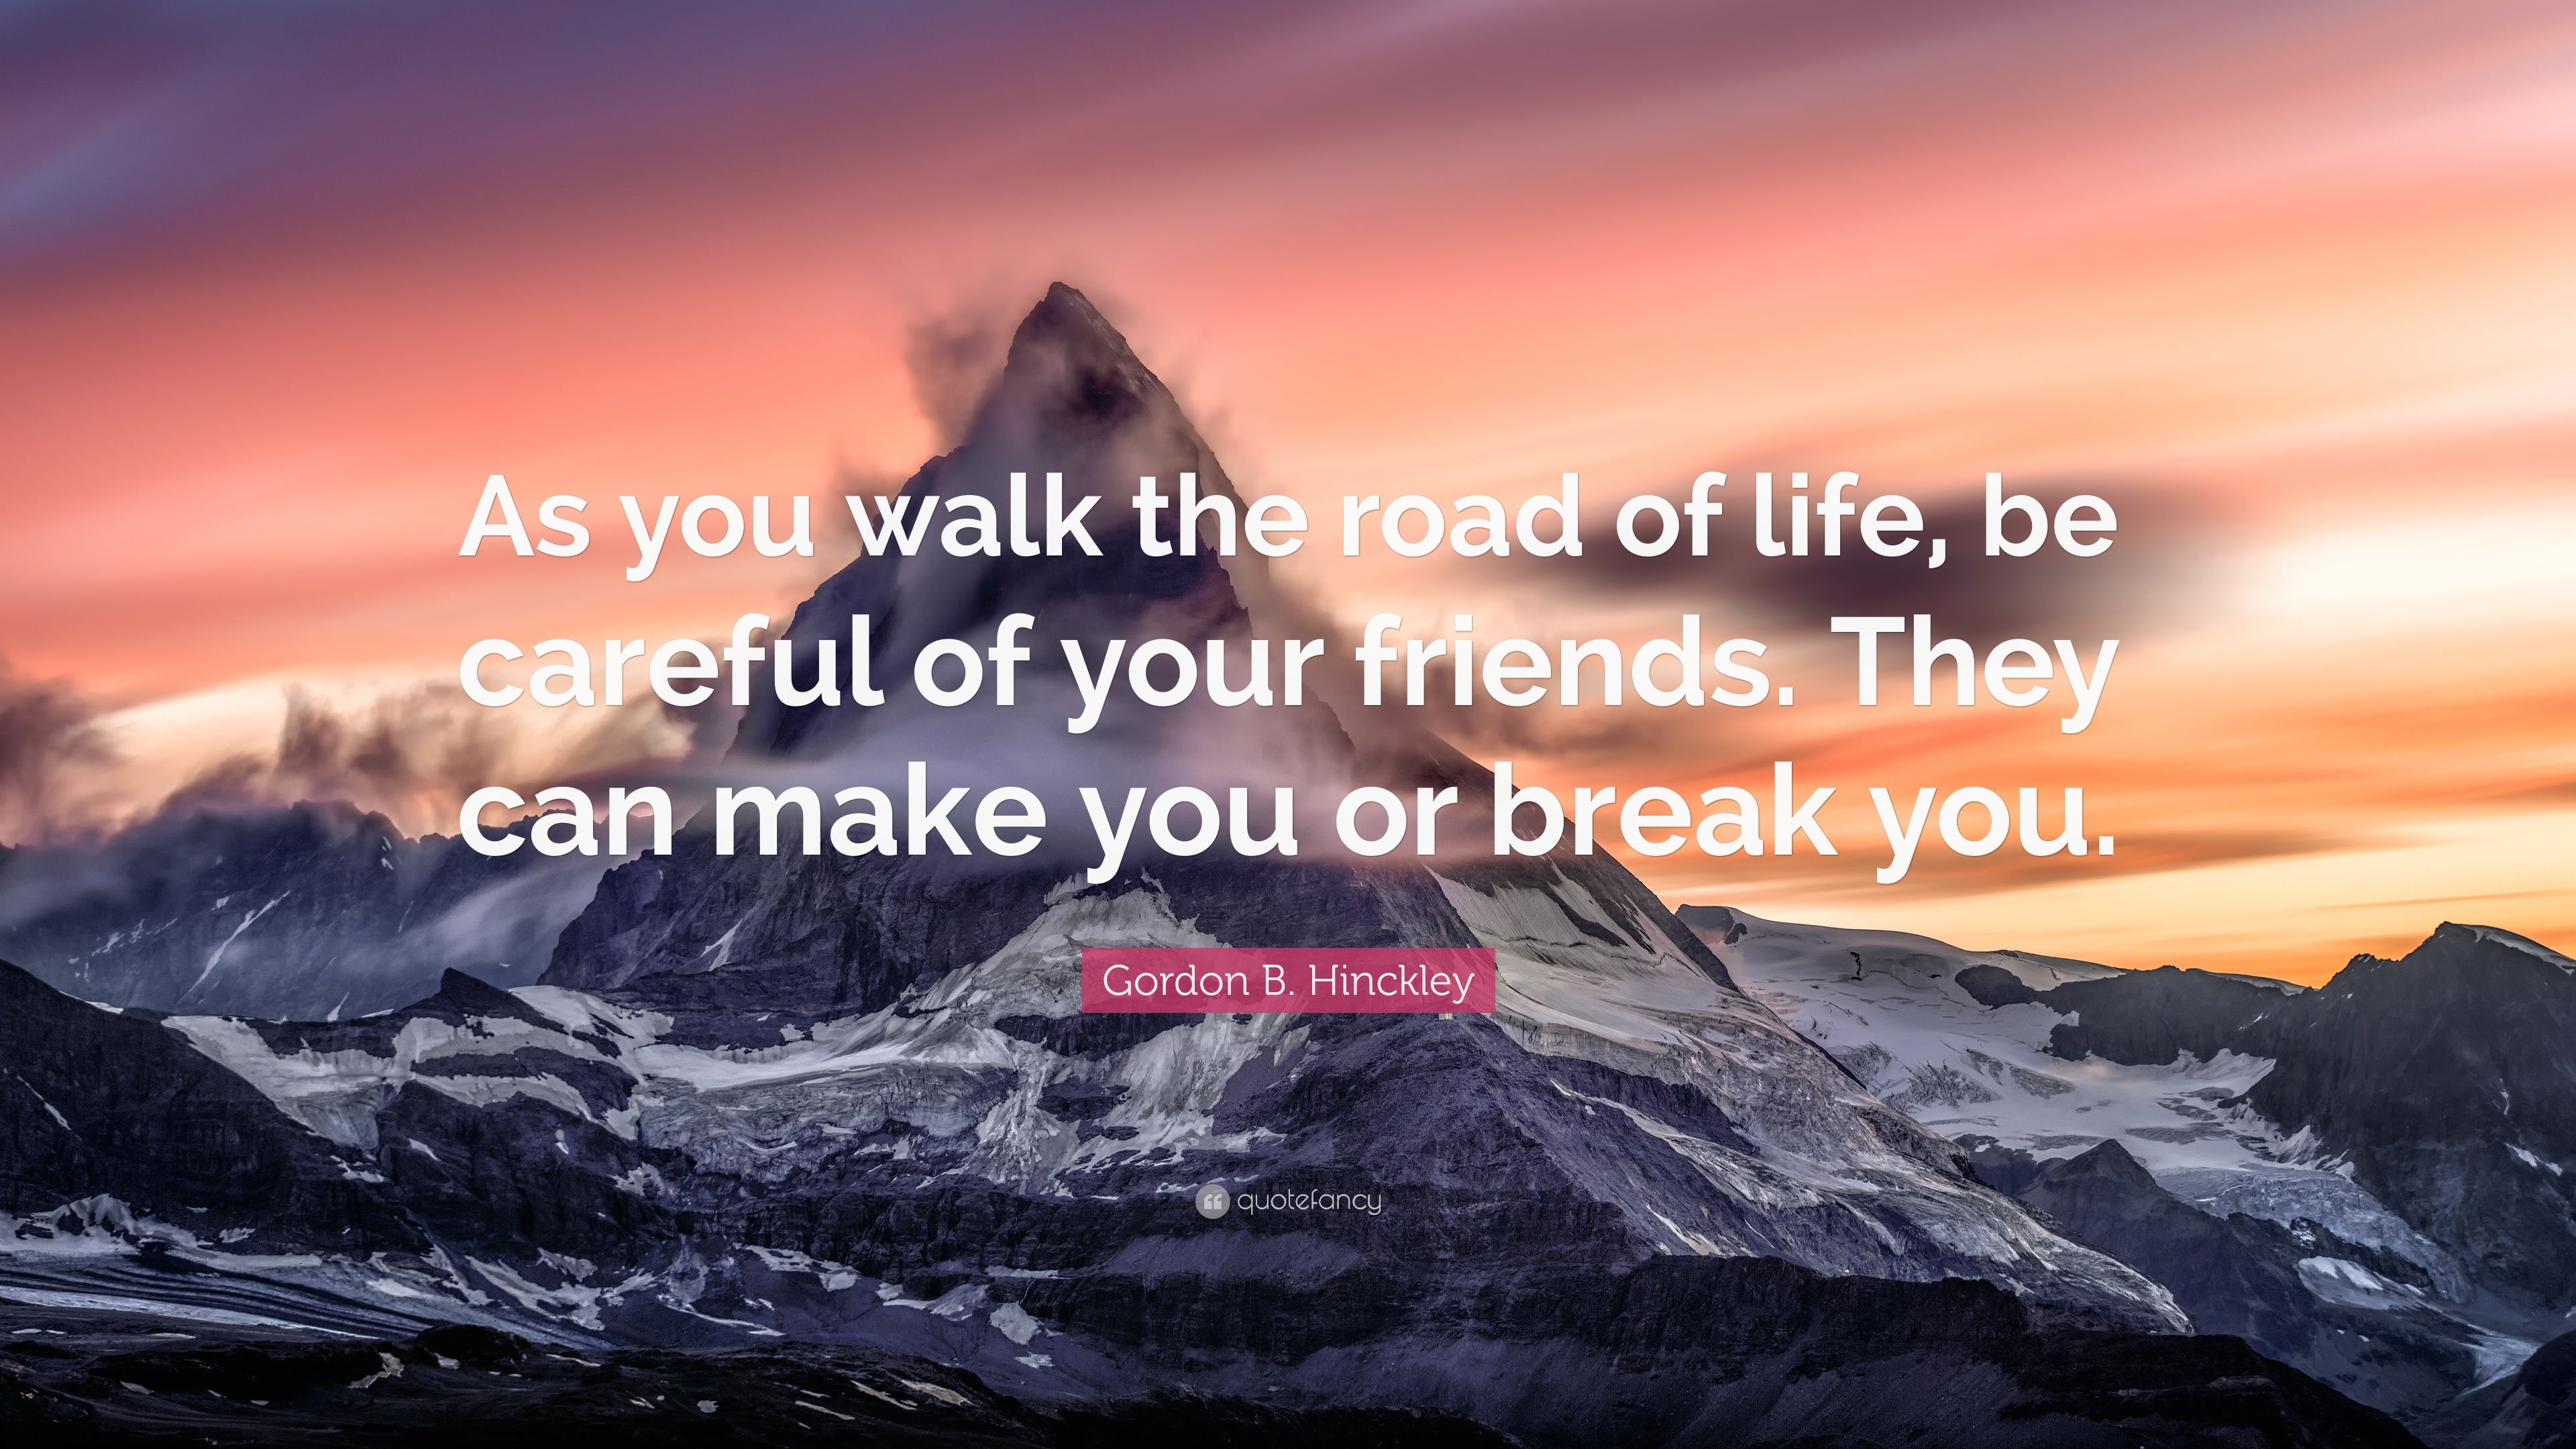 Gordon B. Hinckley Quote: “As you walk the road of life, be careful ...